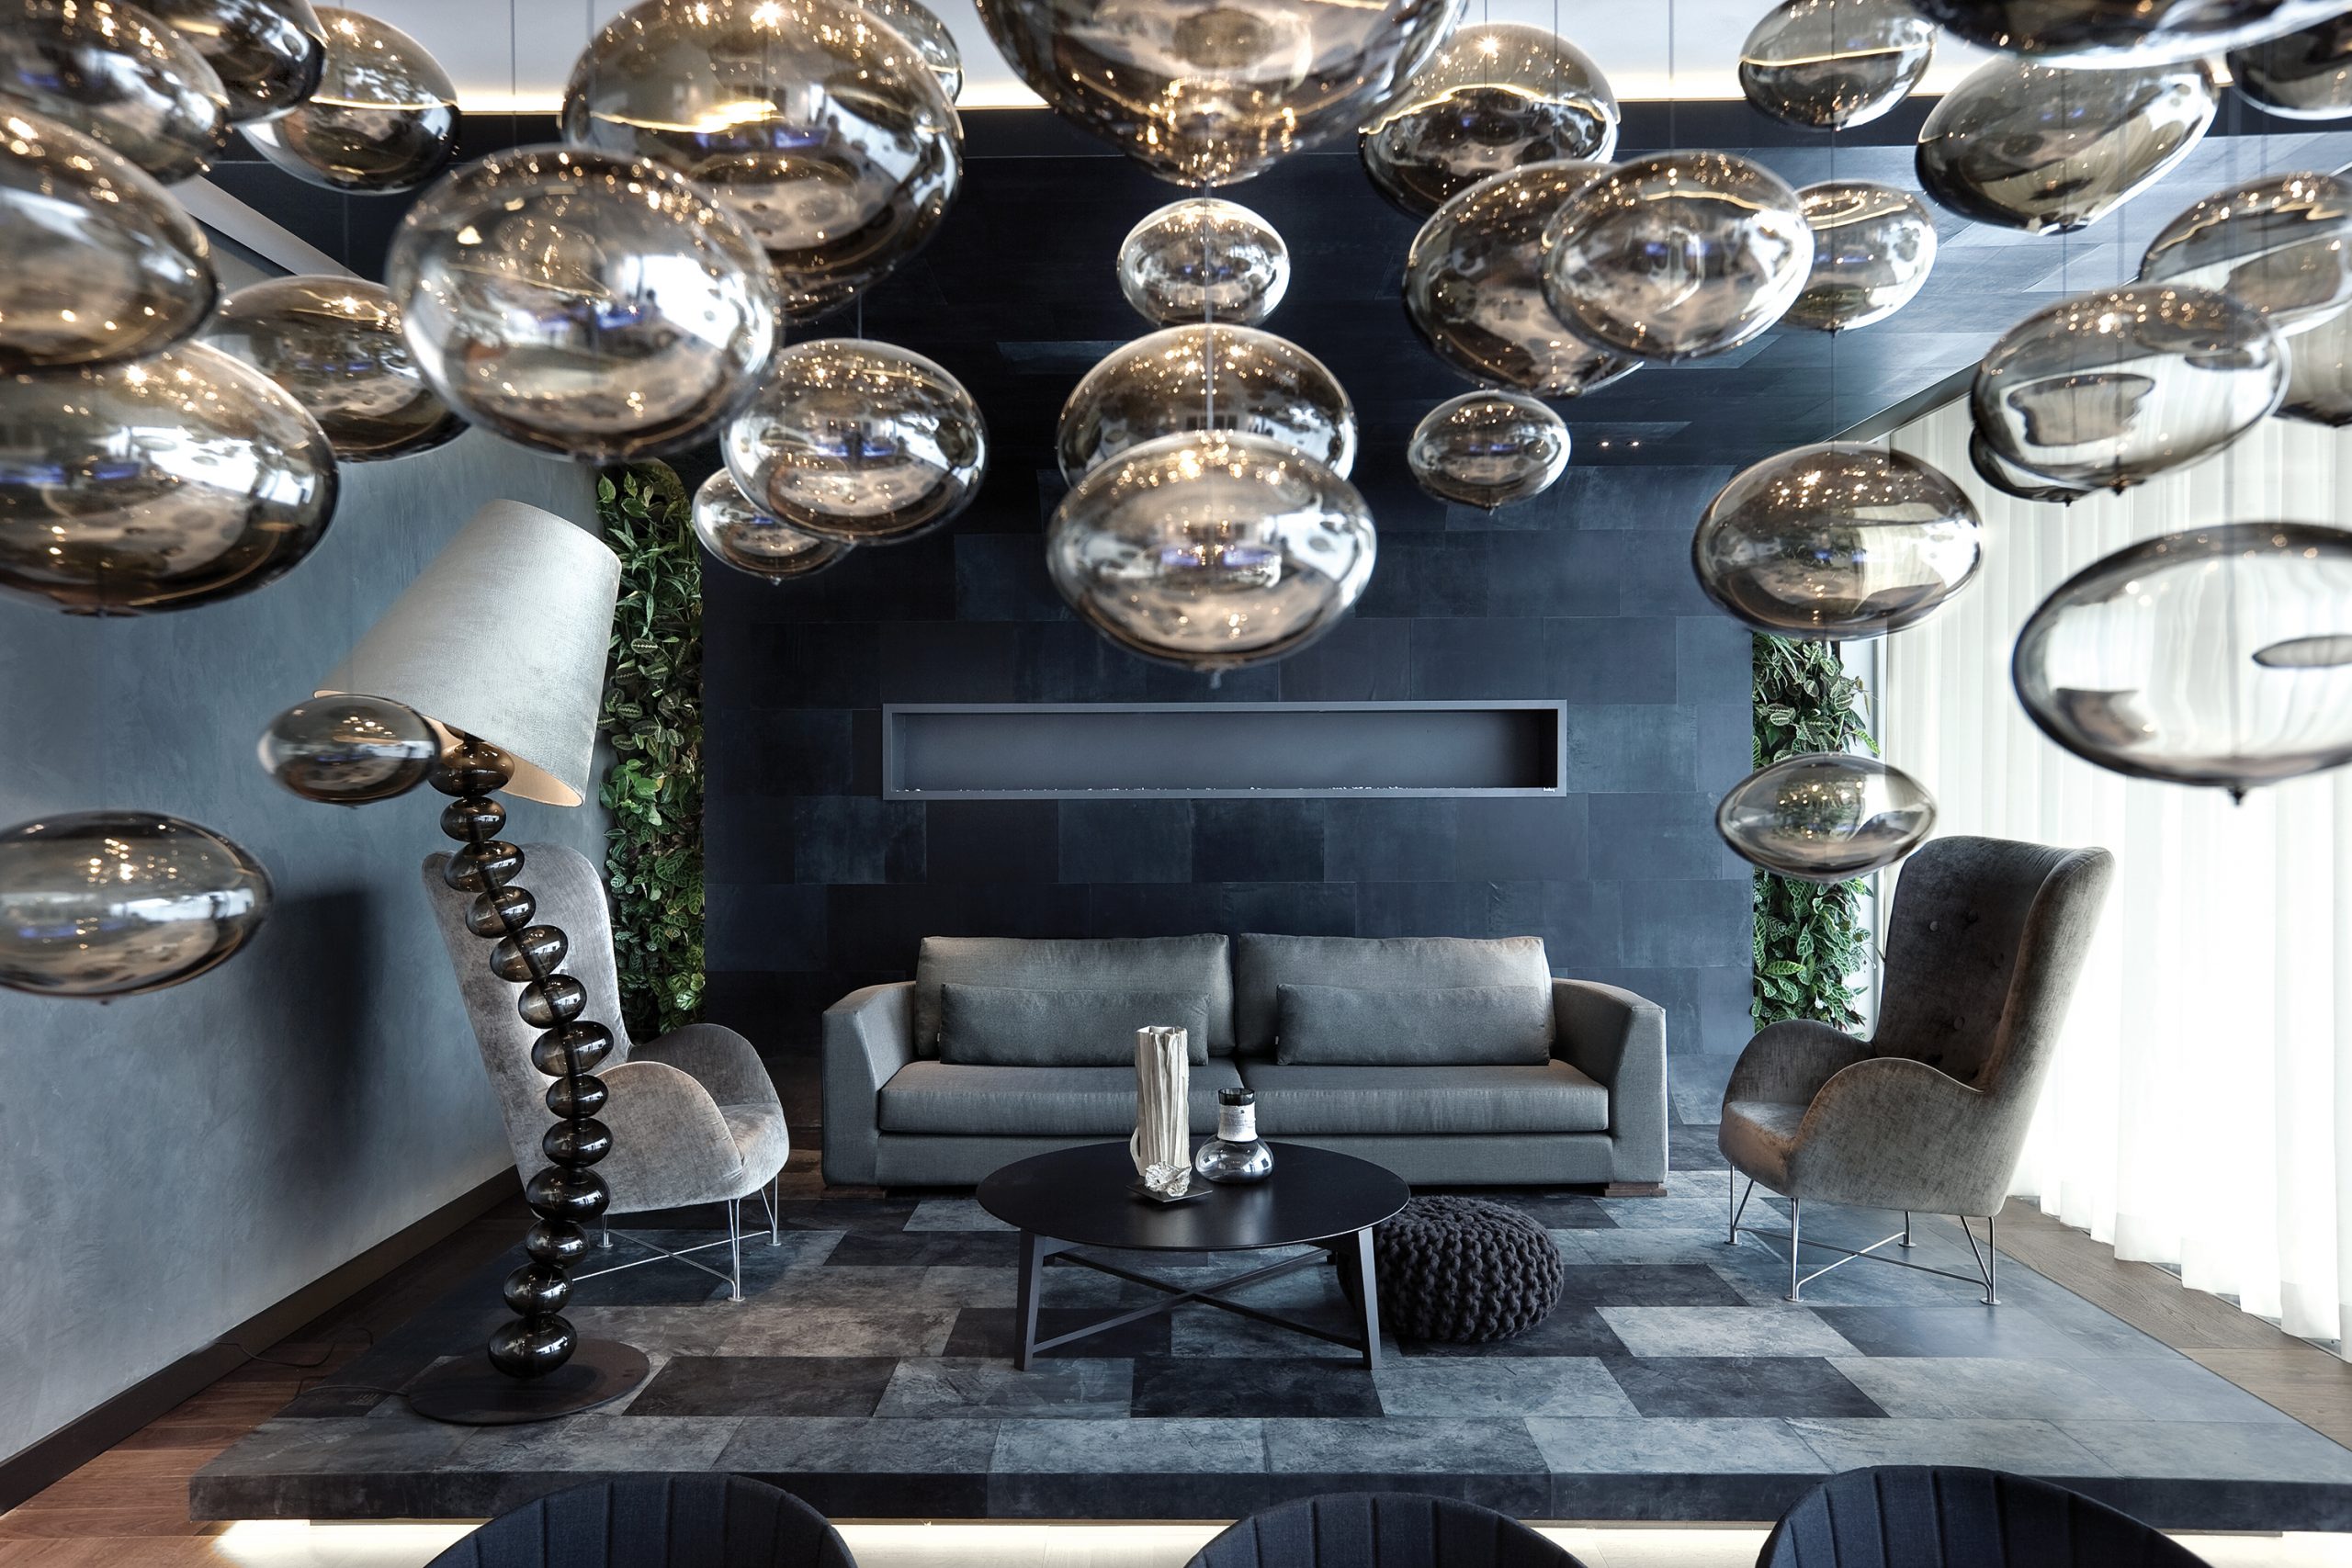 Eco-Chic, according to Robert Kolenik, in the show interior he designed as an apartment at the headquarters of the Dutch lighting specialists, Maretti